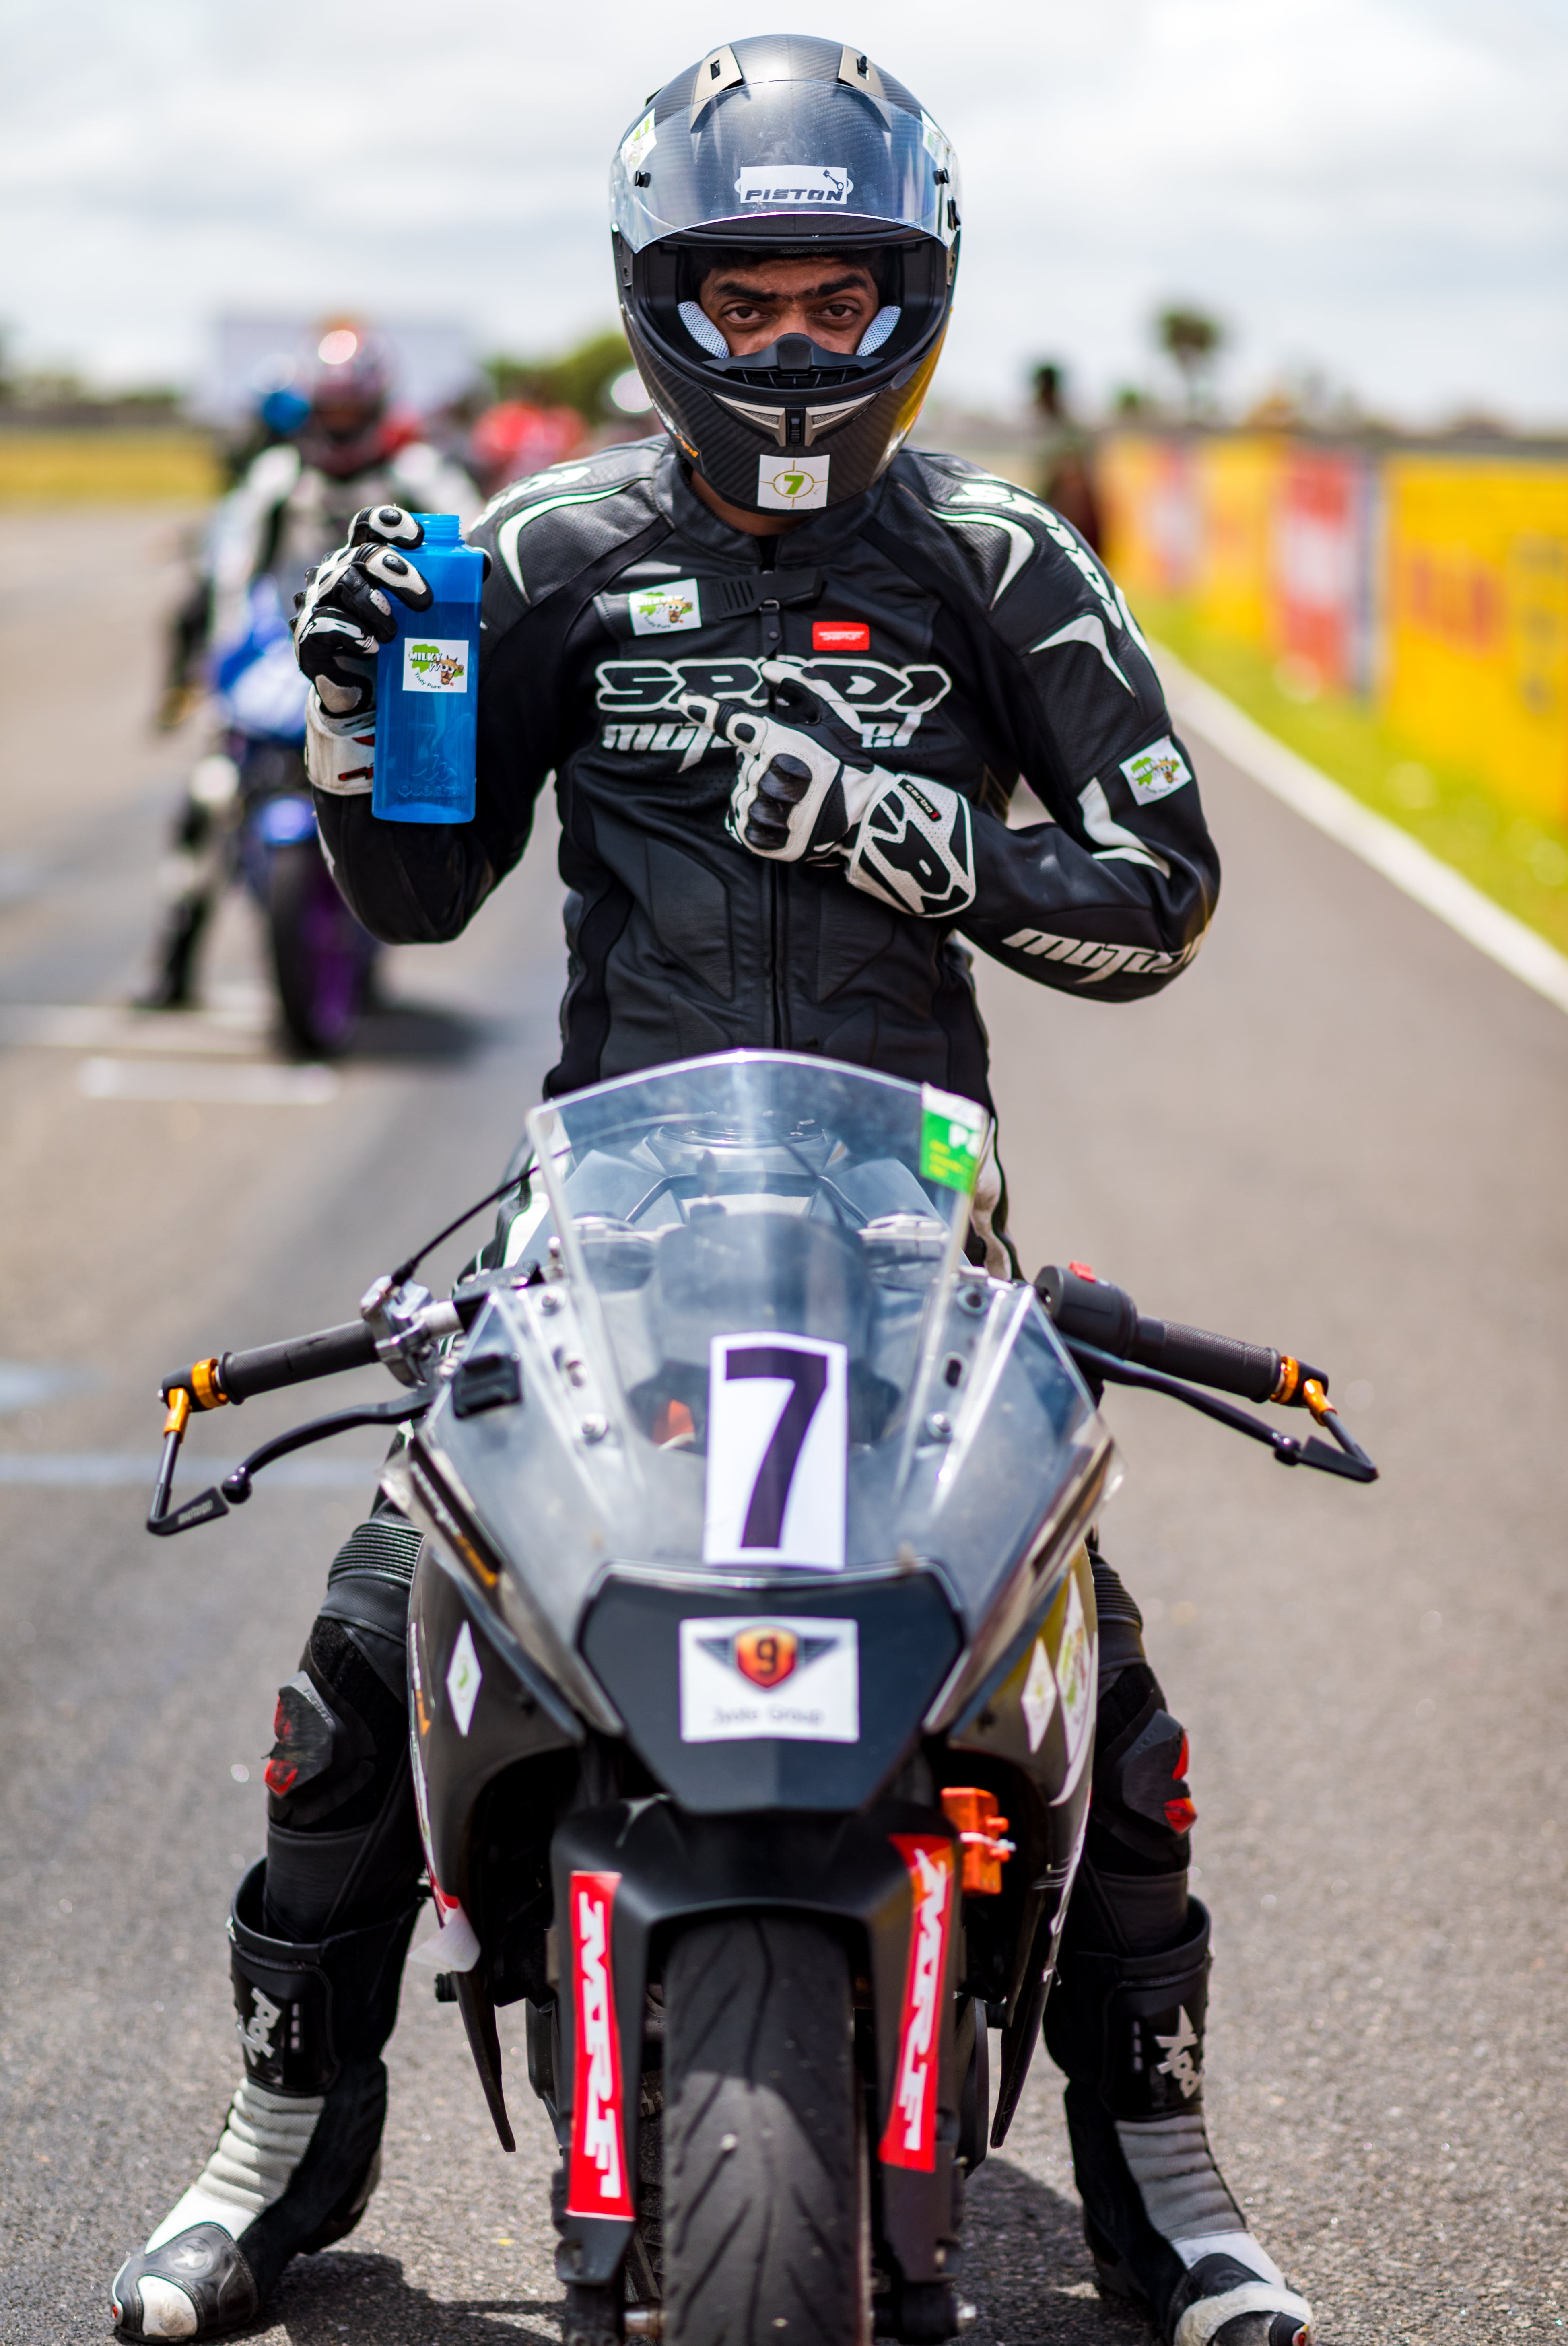 semi professional motorcycle racer